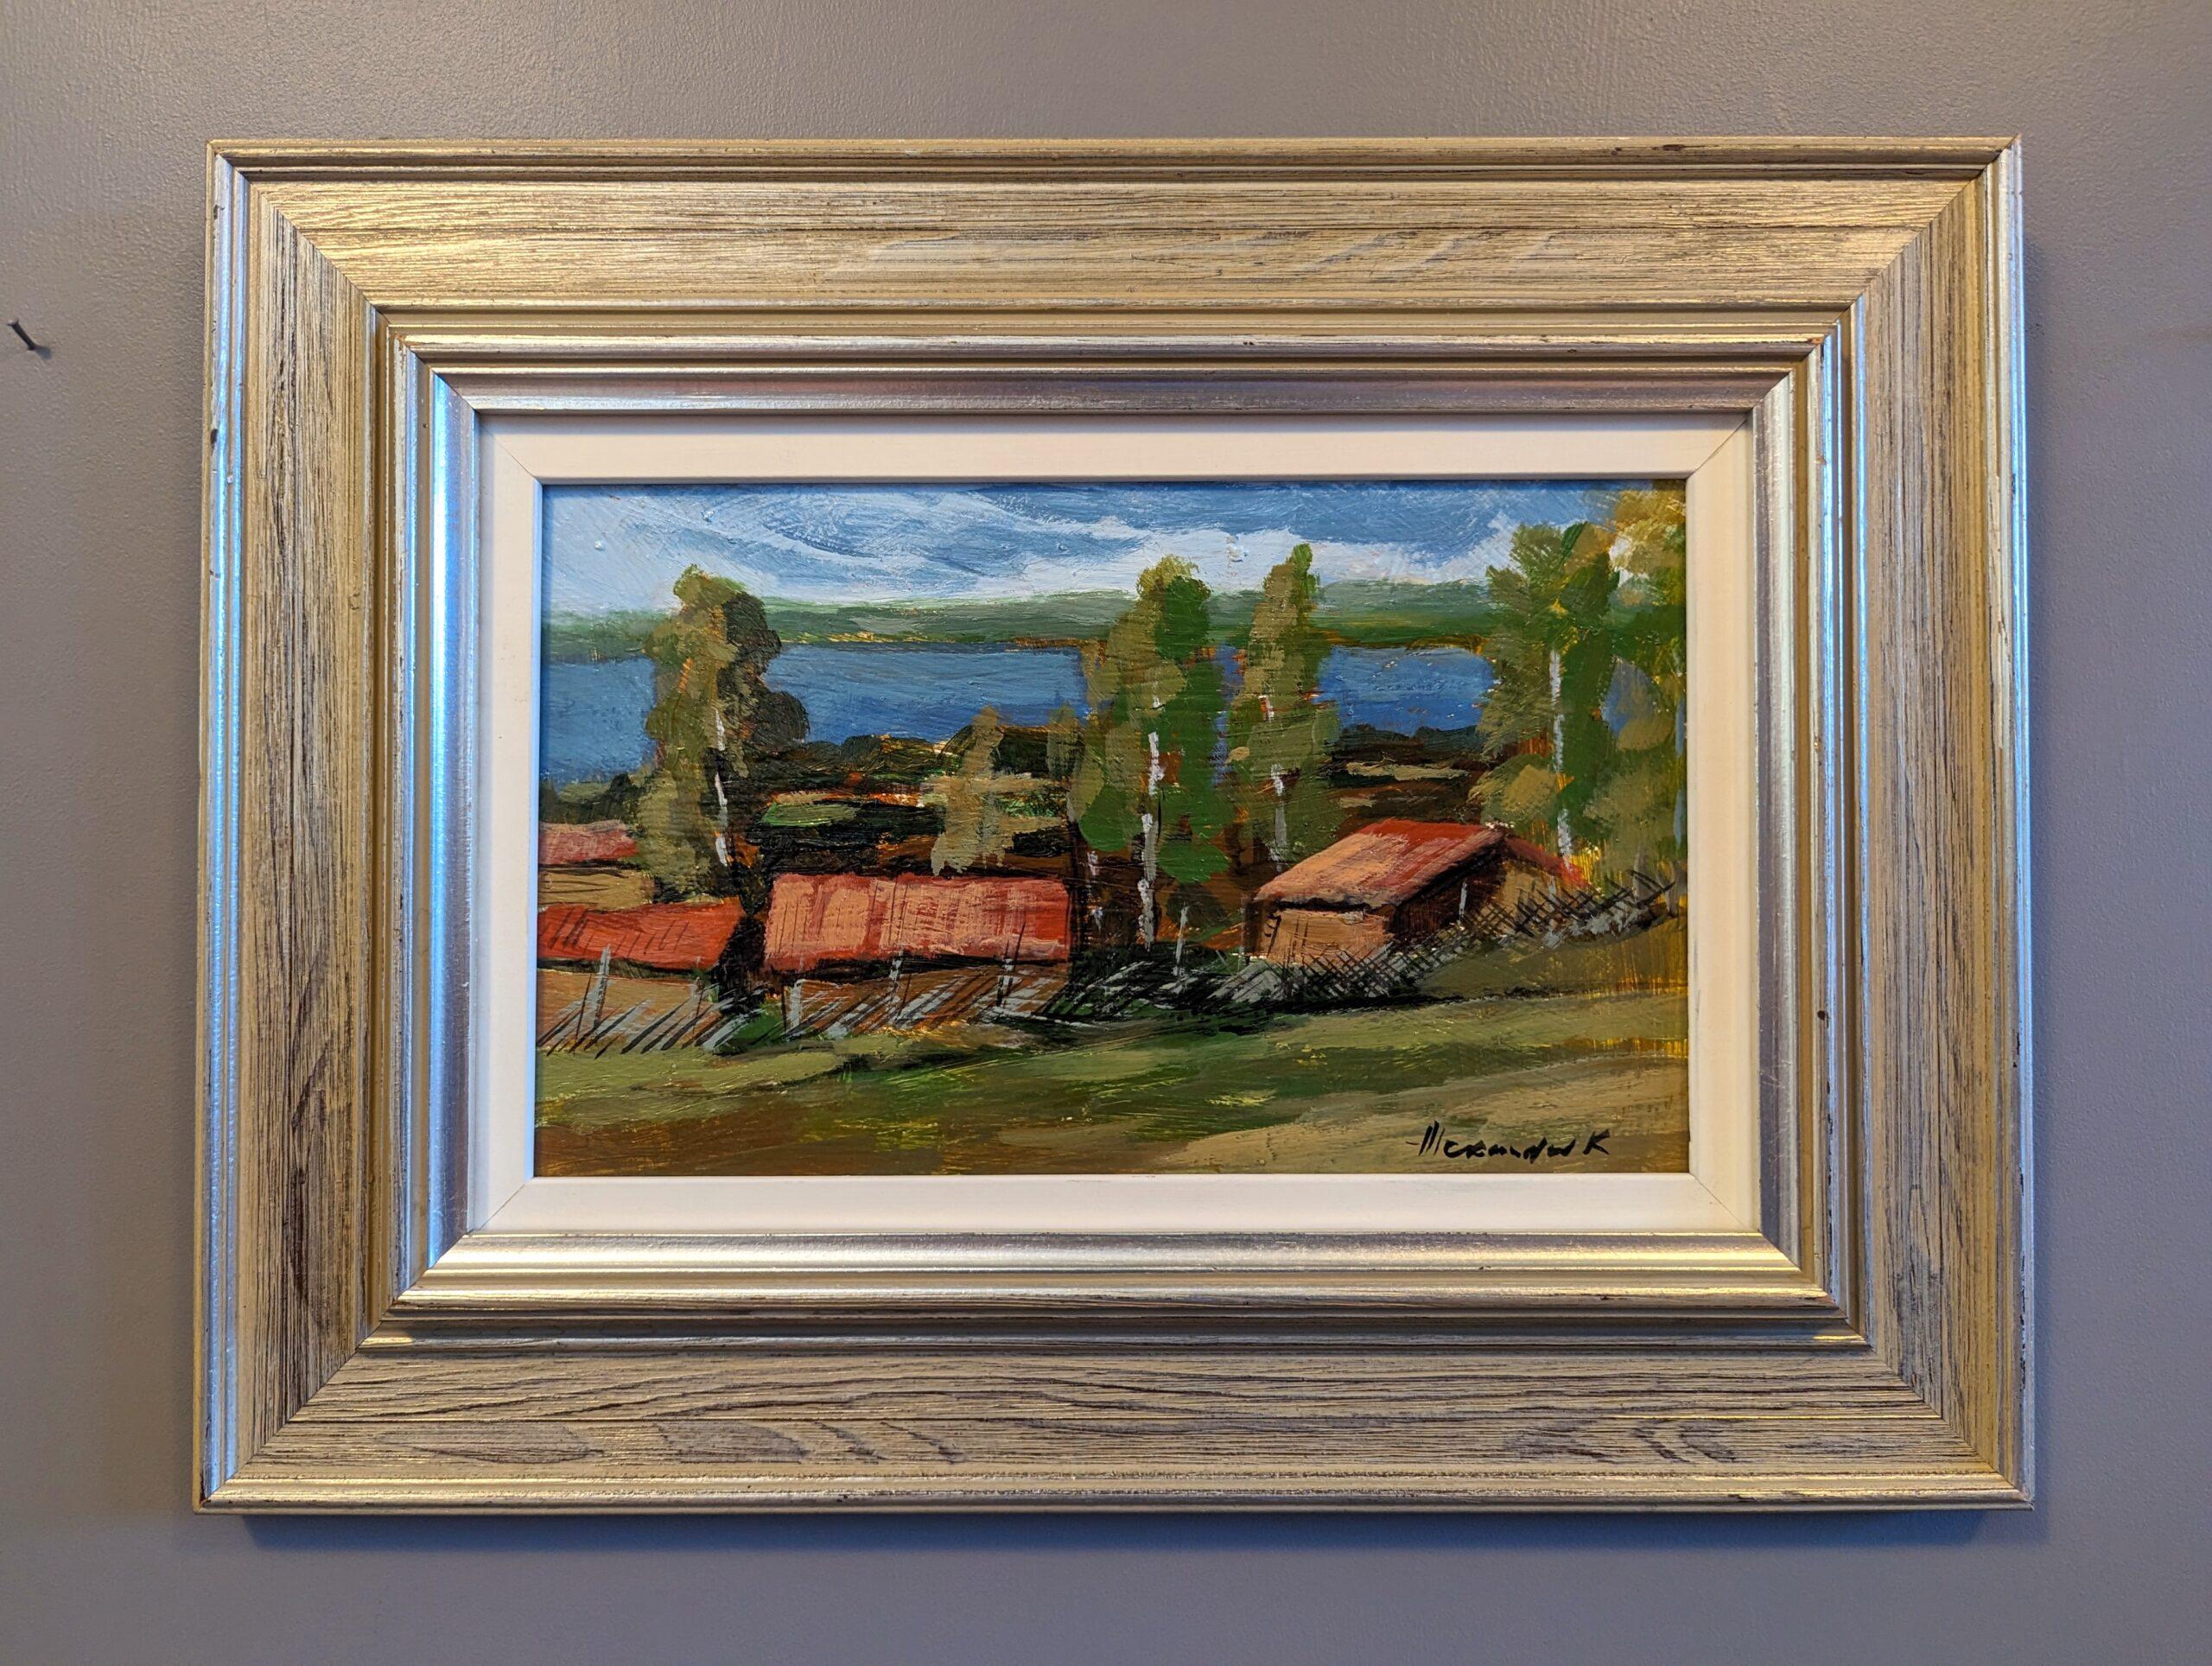 RED HOUSES IN NATURE 
Size: 30.5 x 40.5 cm (including frame)
Oil on Board

A serene and uplifting mid-century landscape painting, executed in oil onto board.

The composition presents a captivating stretch of red houses positioned centrally,